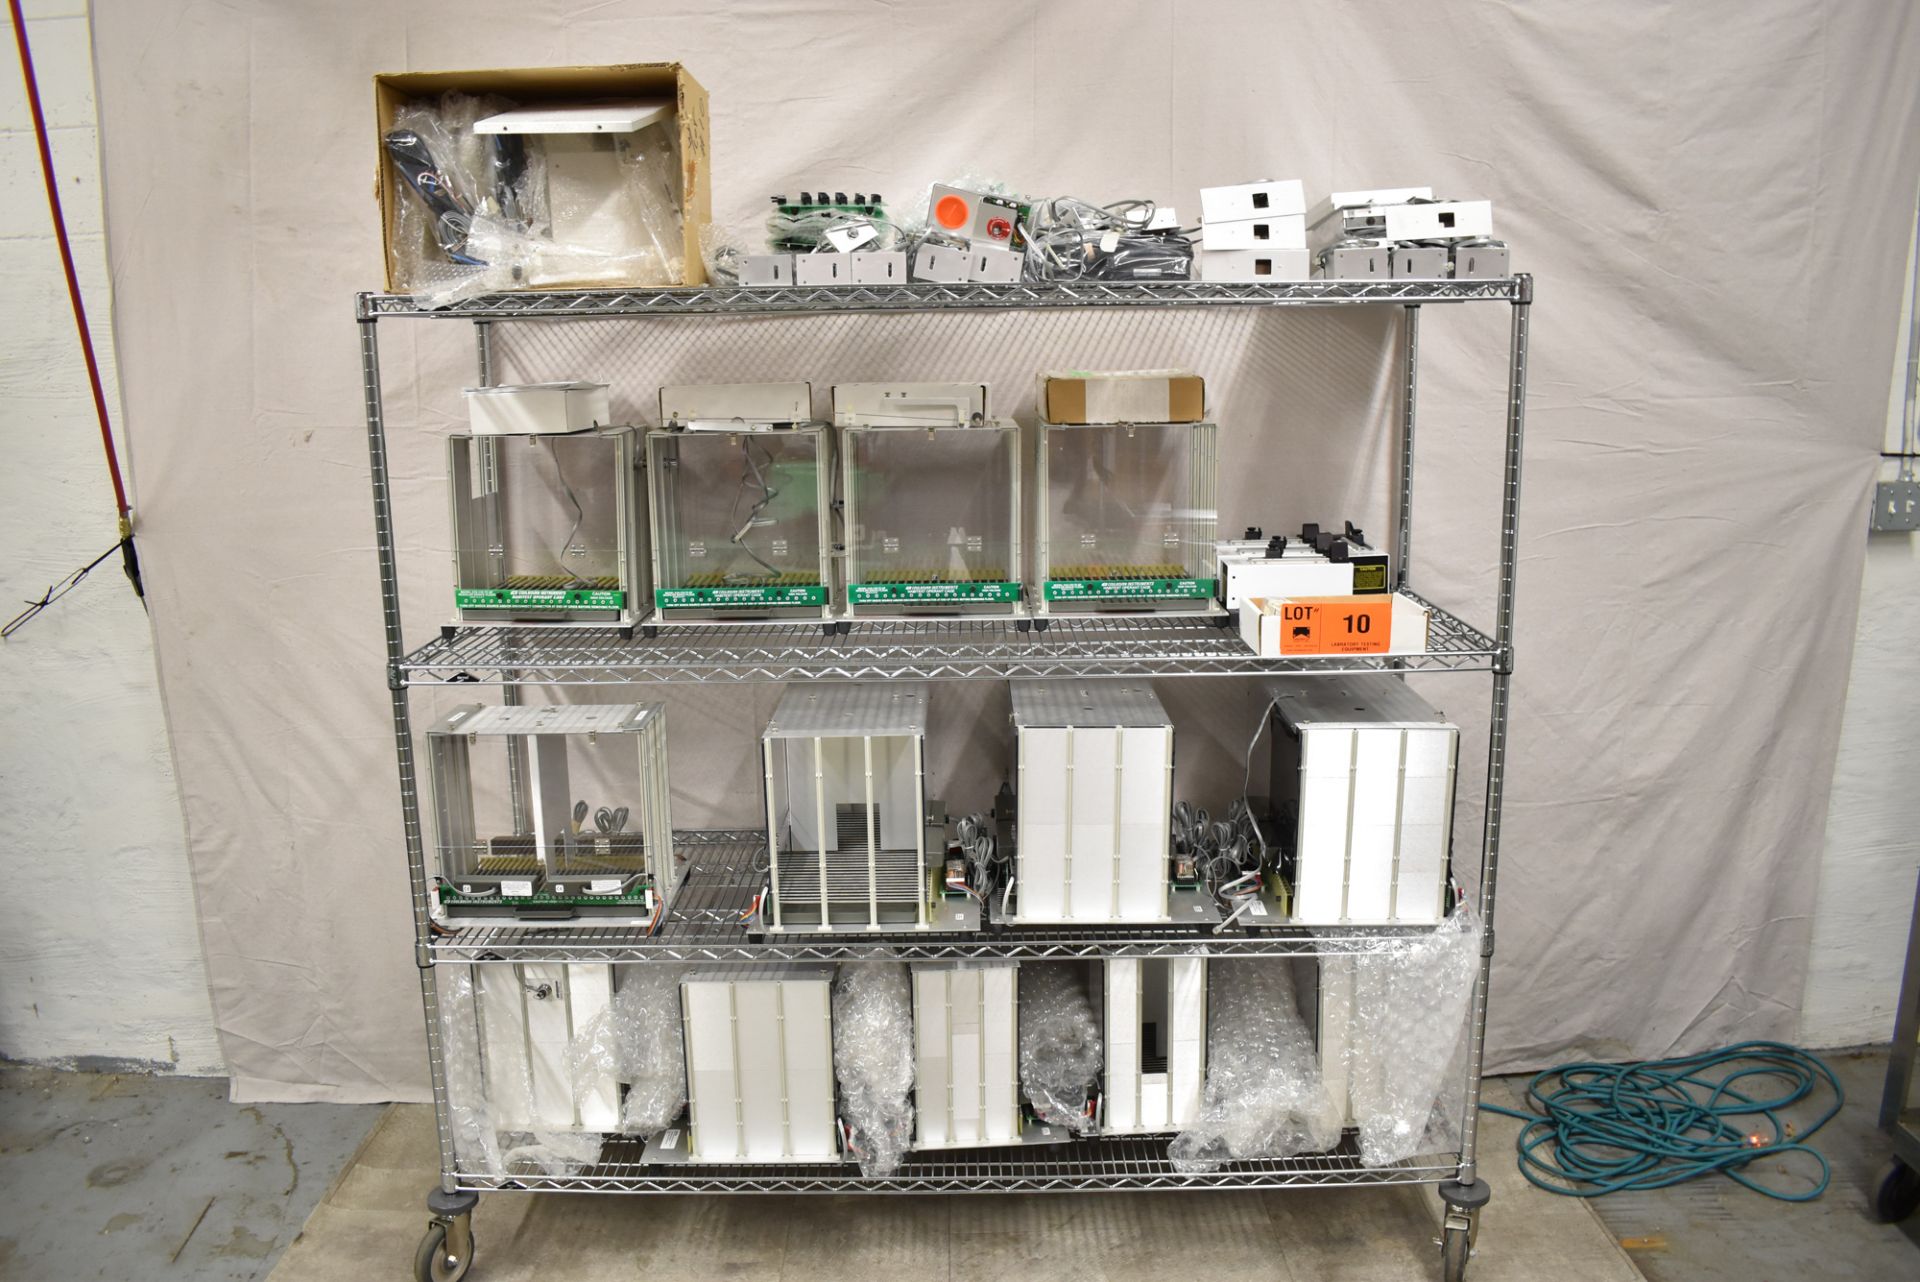 LOT/ COULBOURN BEHAVIORAL TESTING SYSTEM INCLUDING MODULES AND COMPONENTS, COMPUTER SYSTEM, TRIGGERS - Image 5 of 14